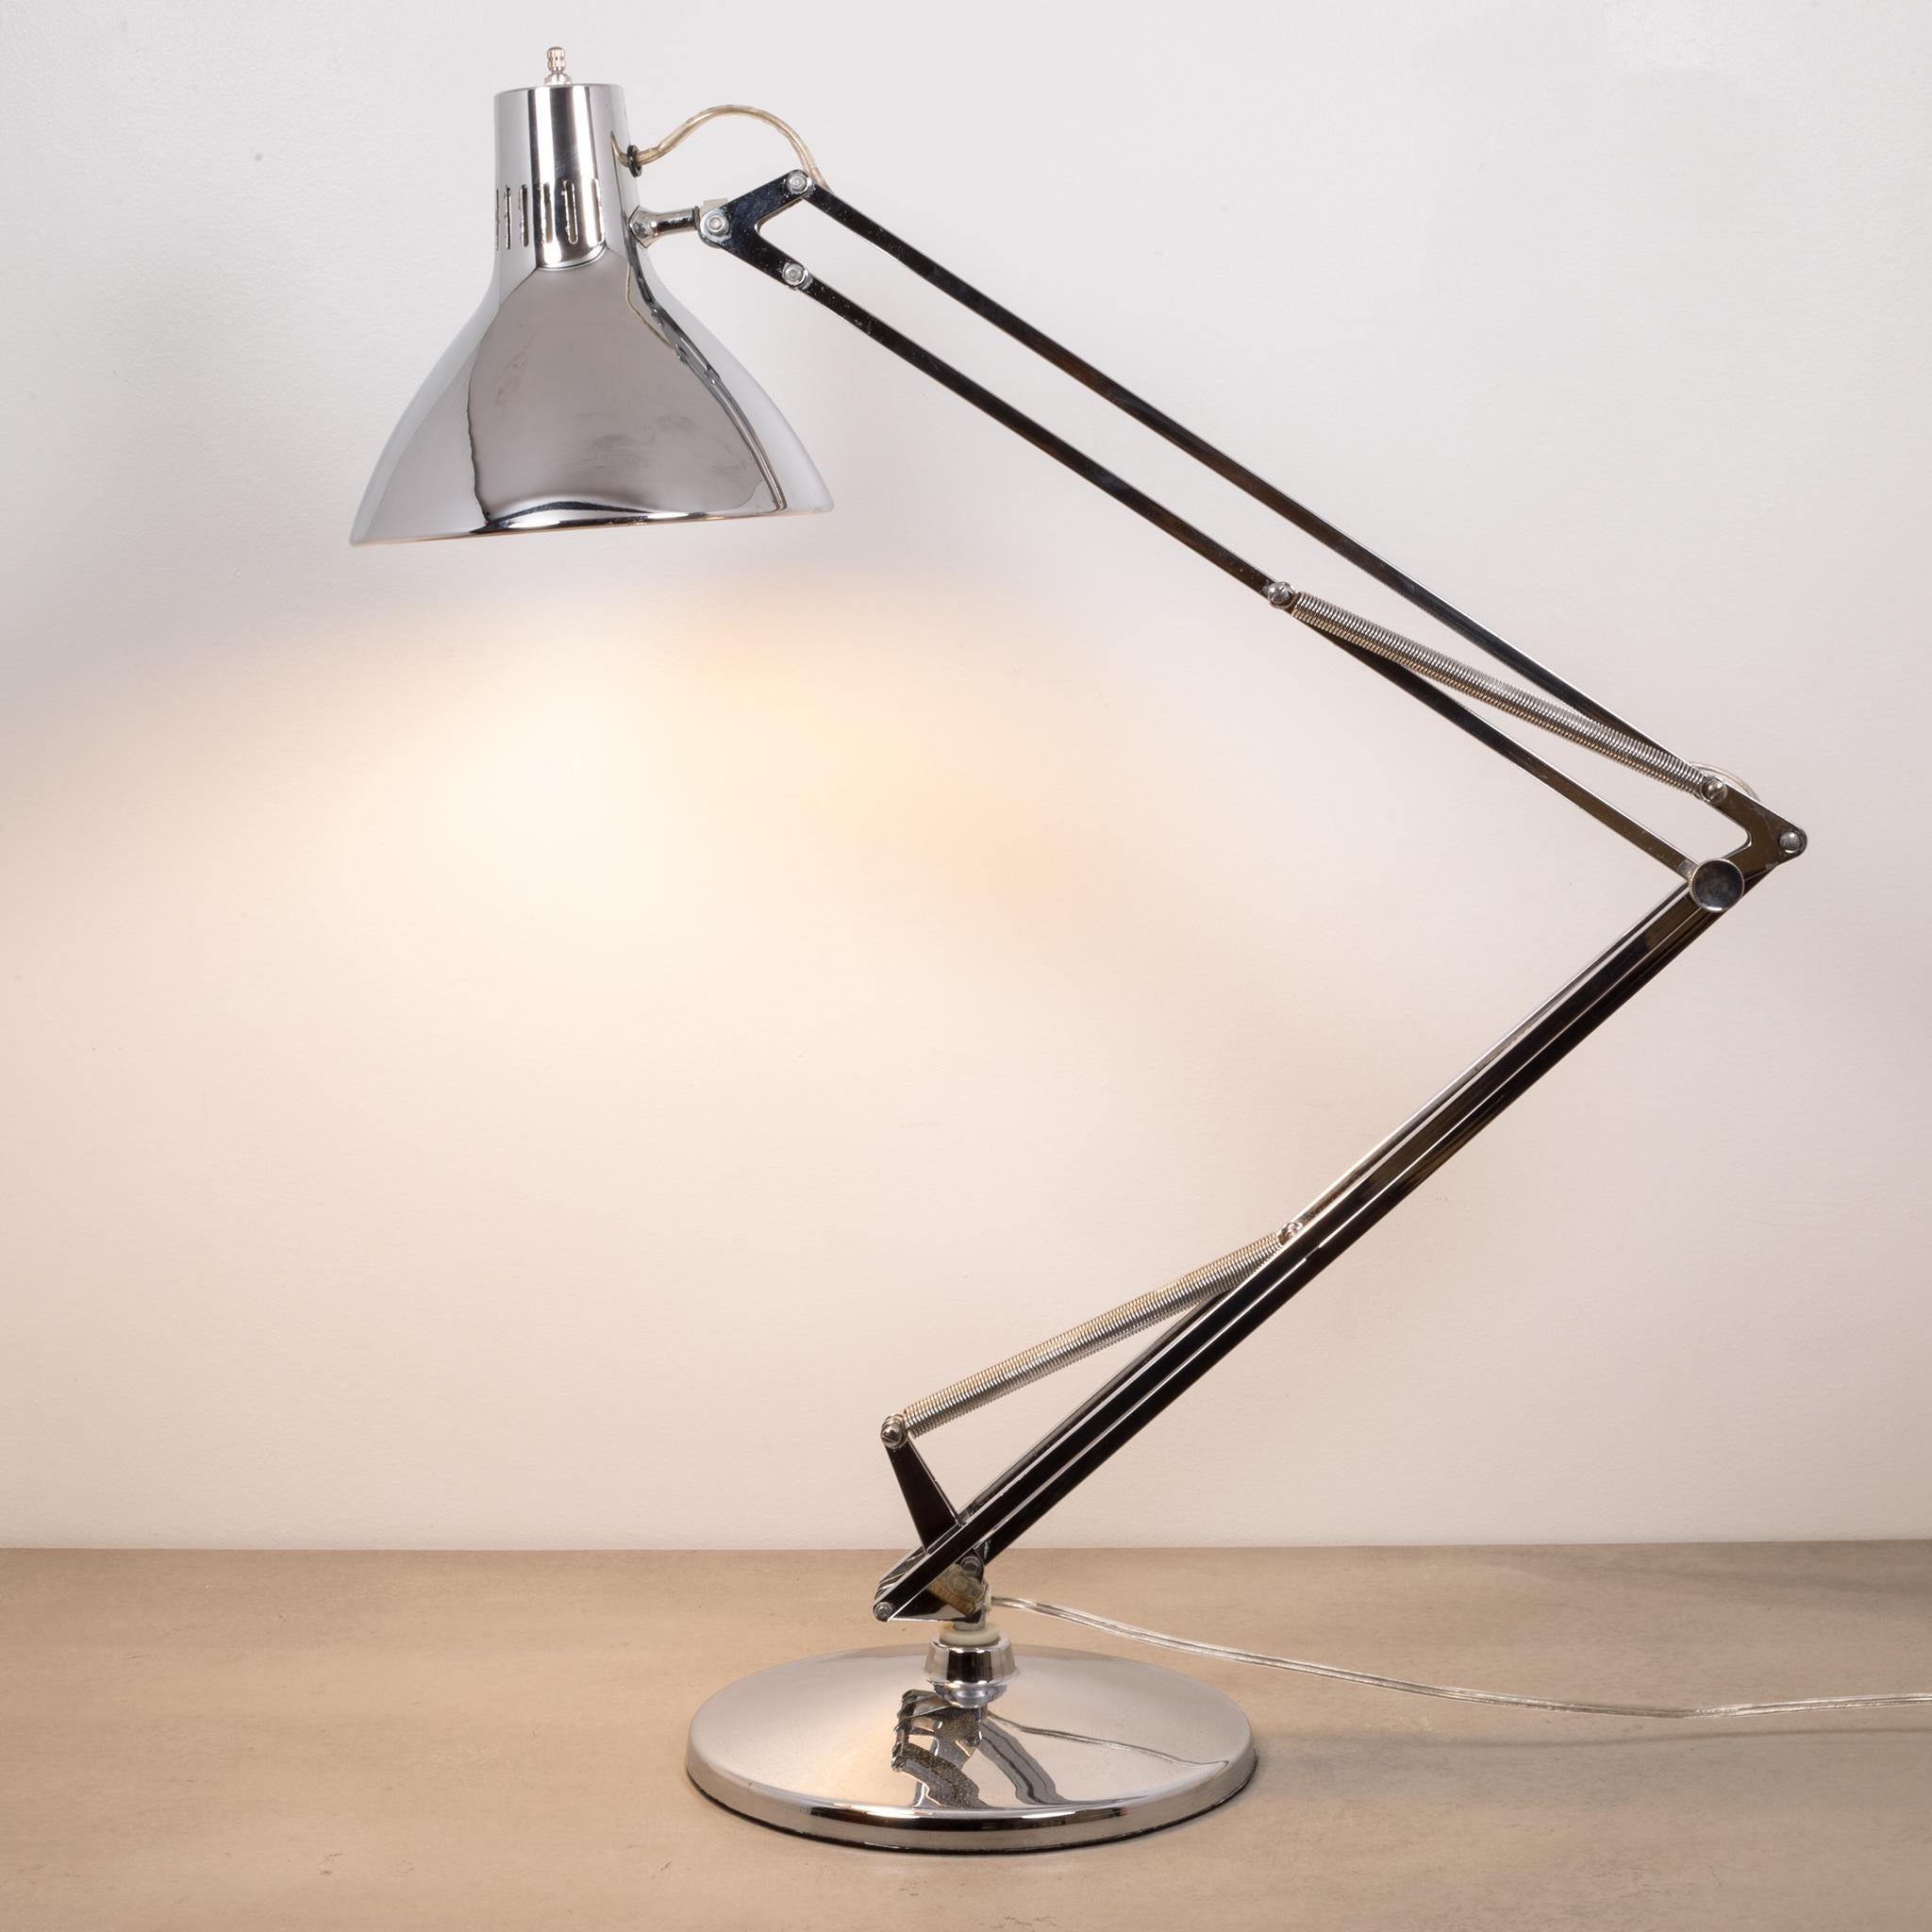 About:

This is an original Luxo articulated, chrome desk lamp. This lamp was originally designed in 1937 by Jac Jacobsen and it's classic design still looks modern today. The shade has an inner plastic shade. This piece has retained its original